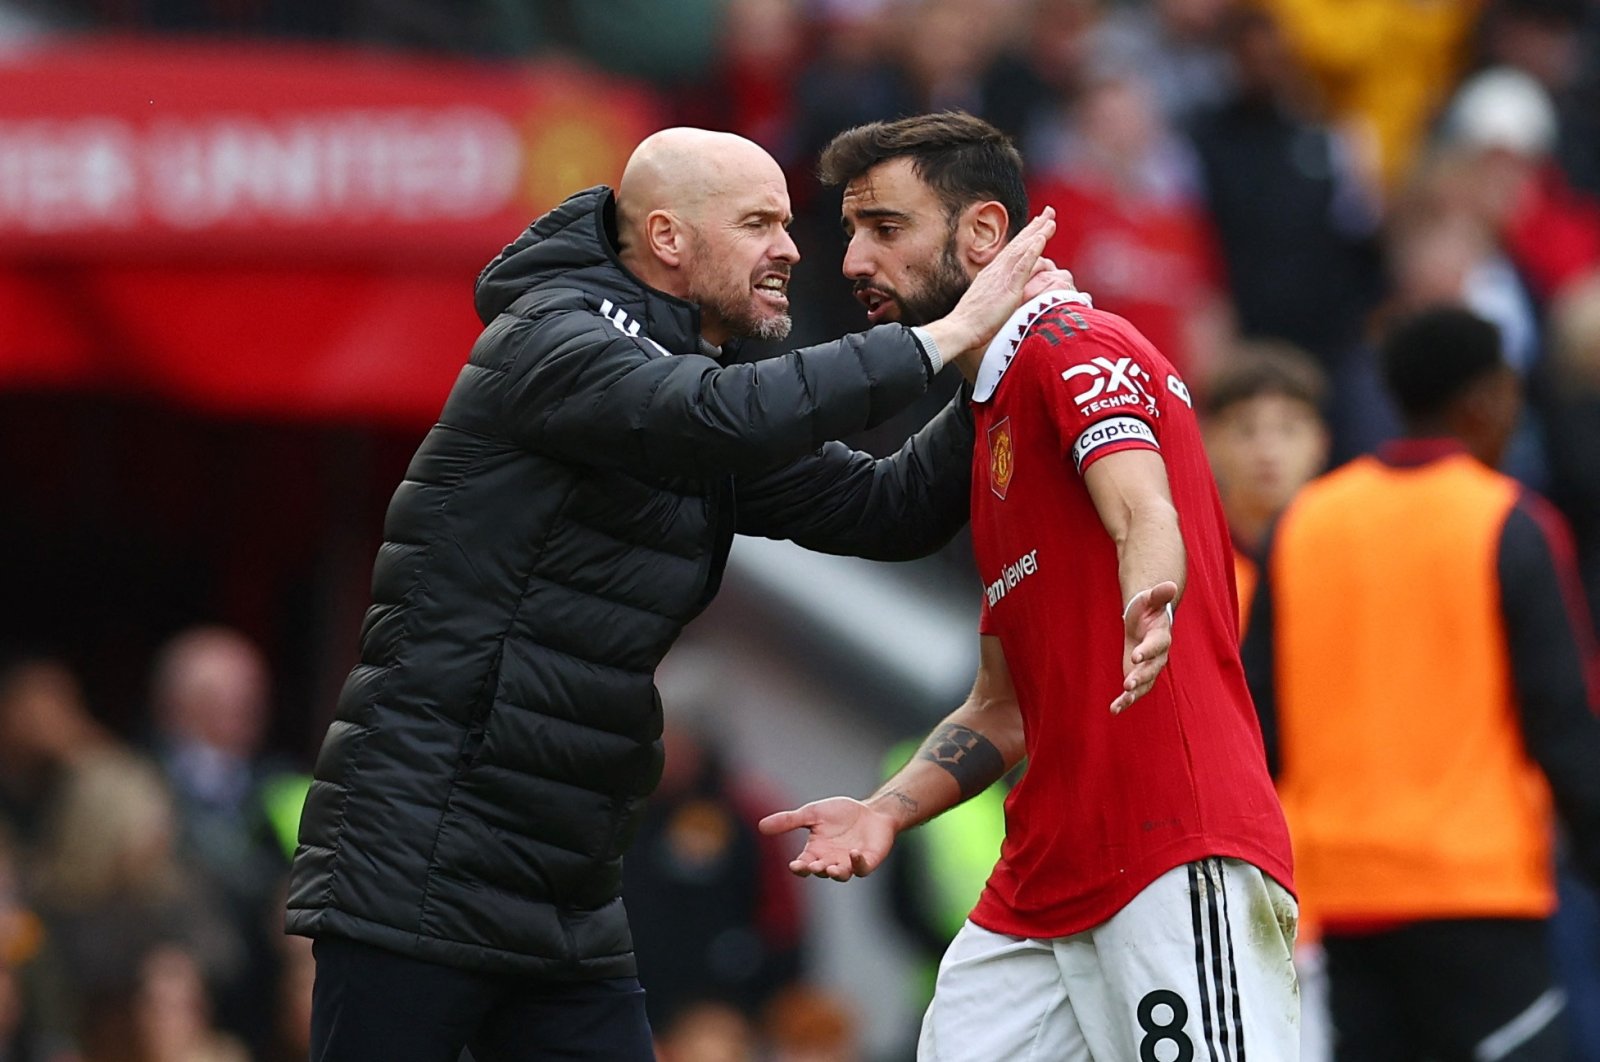 Manchester United manager Erik ten Hag reacts toward Bruno Fernandes during the Manchester United versus Newcastle United match at Old Trafford, Manchester, Britain, Oct. 16, 2022 (Reuters Photo)